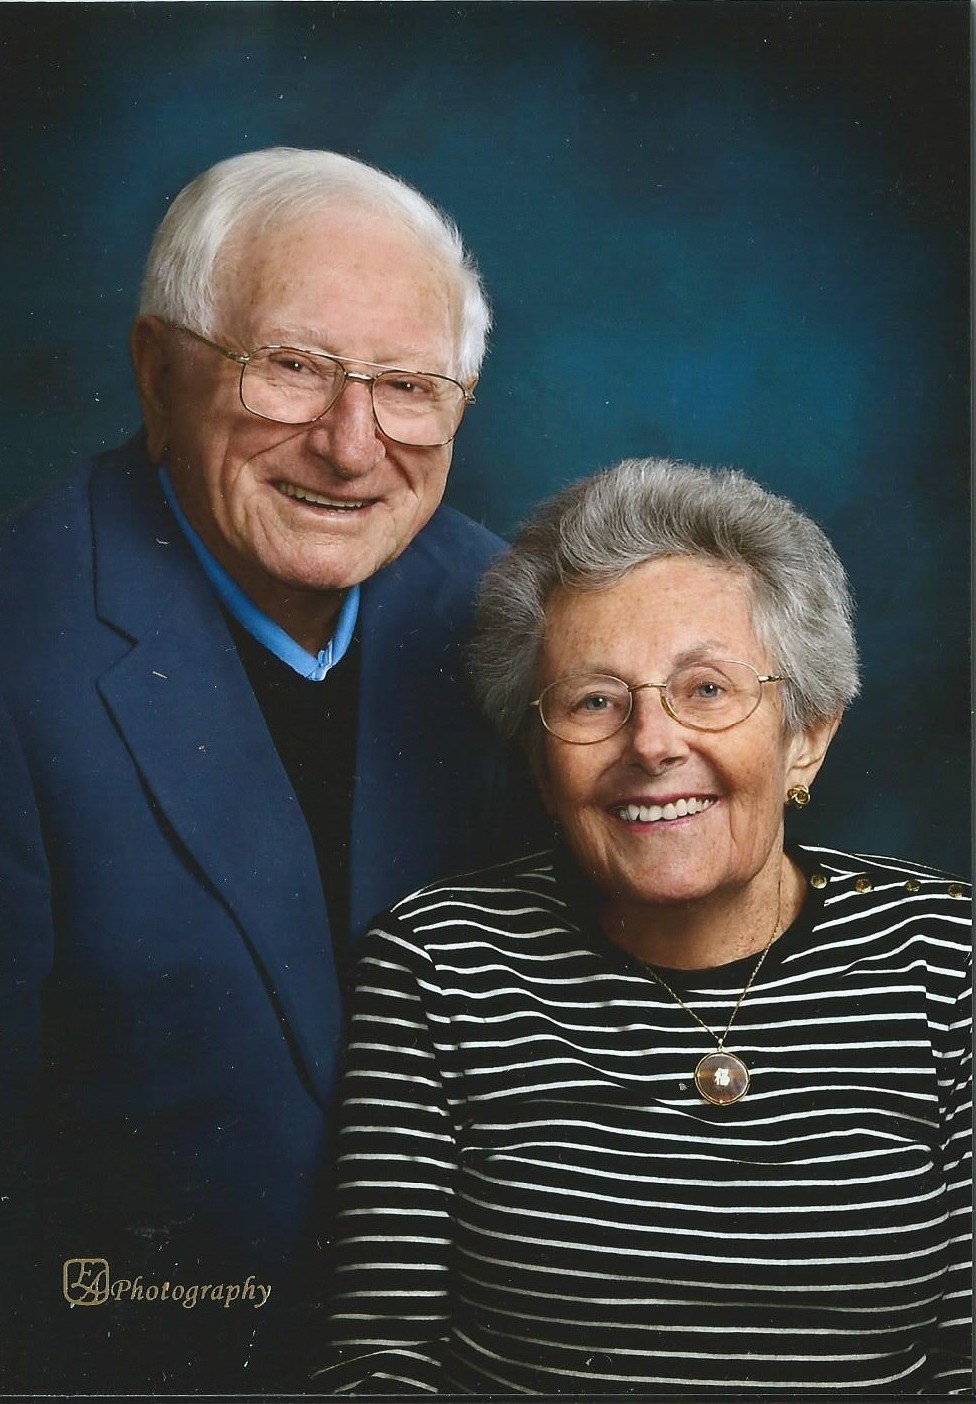 Robert A. Nevins, MD: Dr. Nevins and his beloved wife Mary